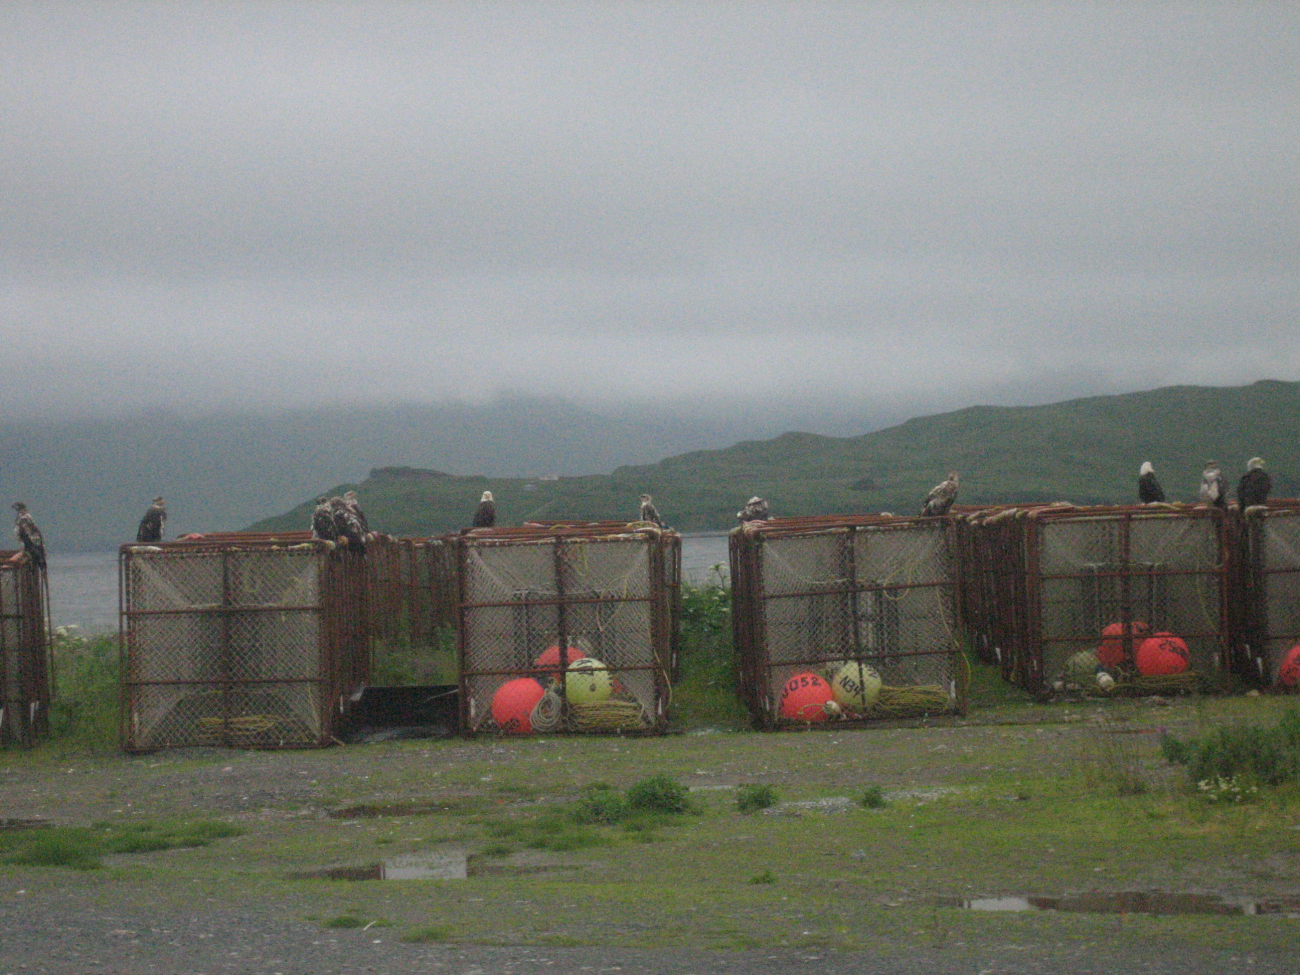 Eagles, sometimes called the rats of the North, perched on crabpots at Dutch Harbor